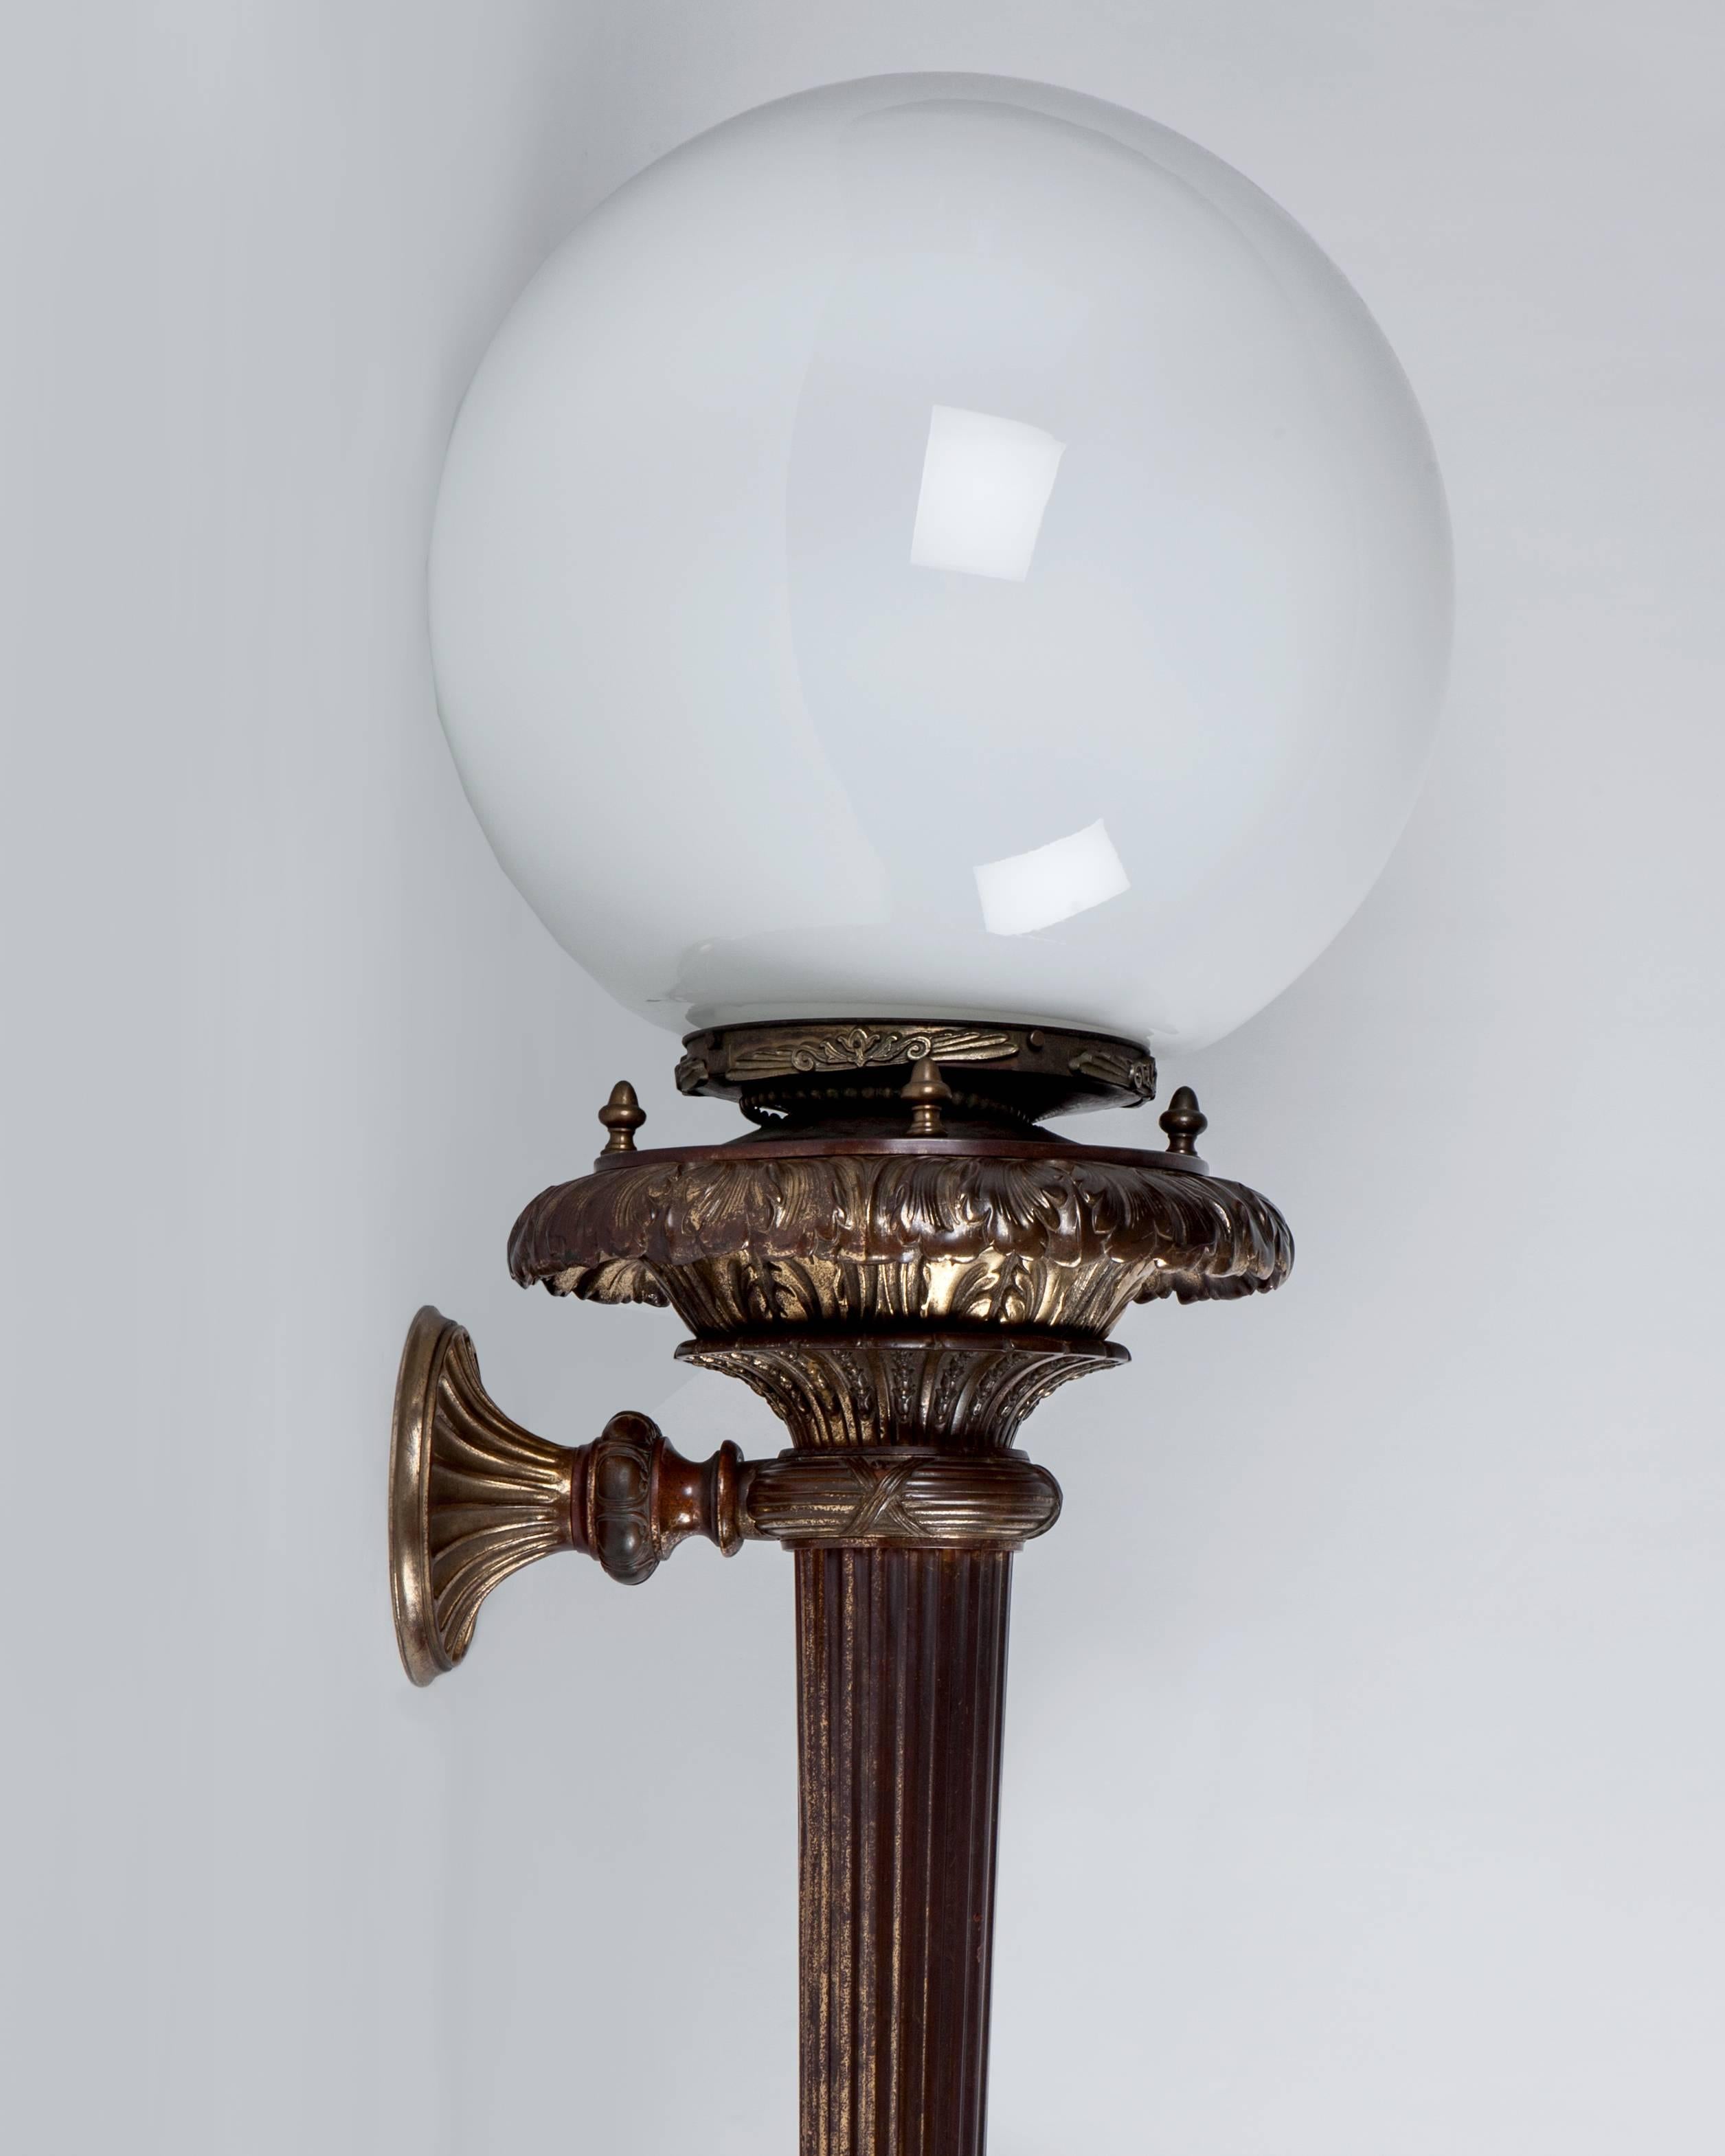 American Cast Bronze Empire Style Wall Sconces with Opal White Glass Globes, Circa 1900s For Sale